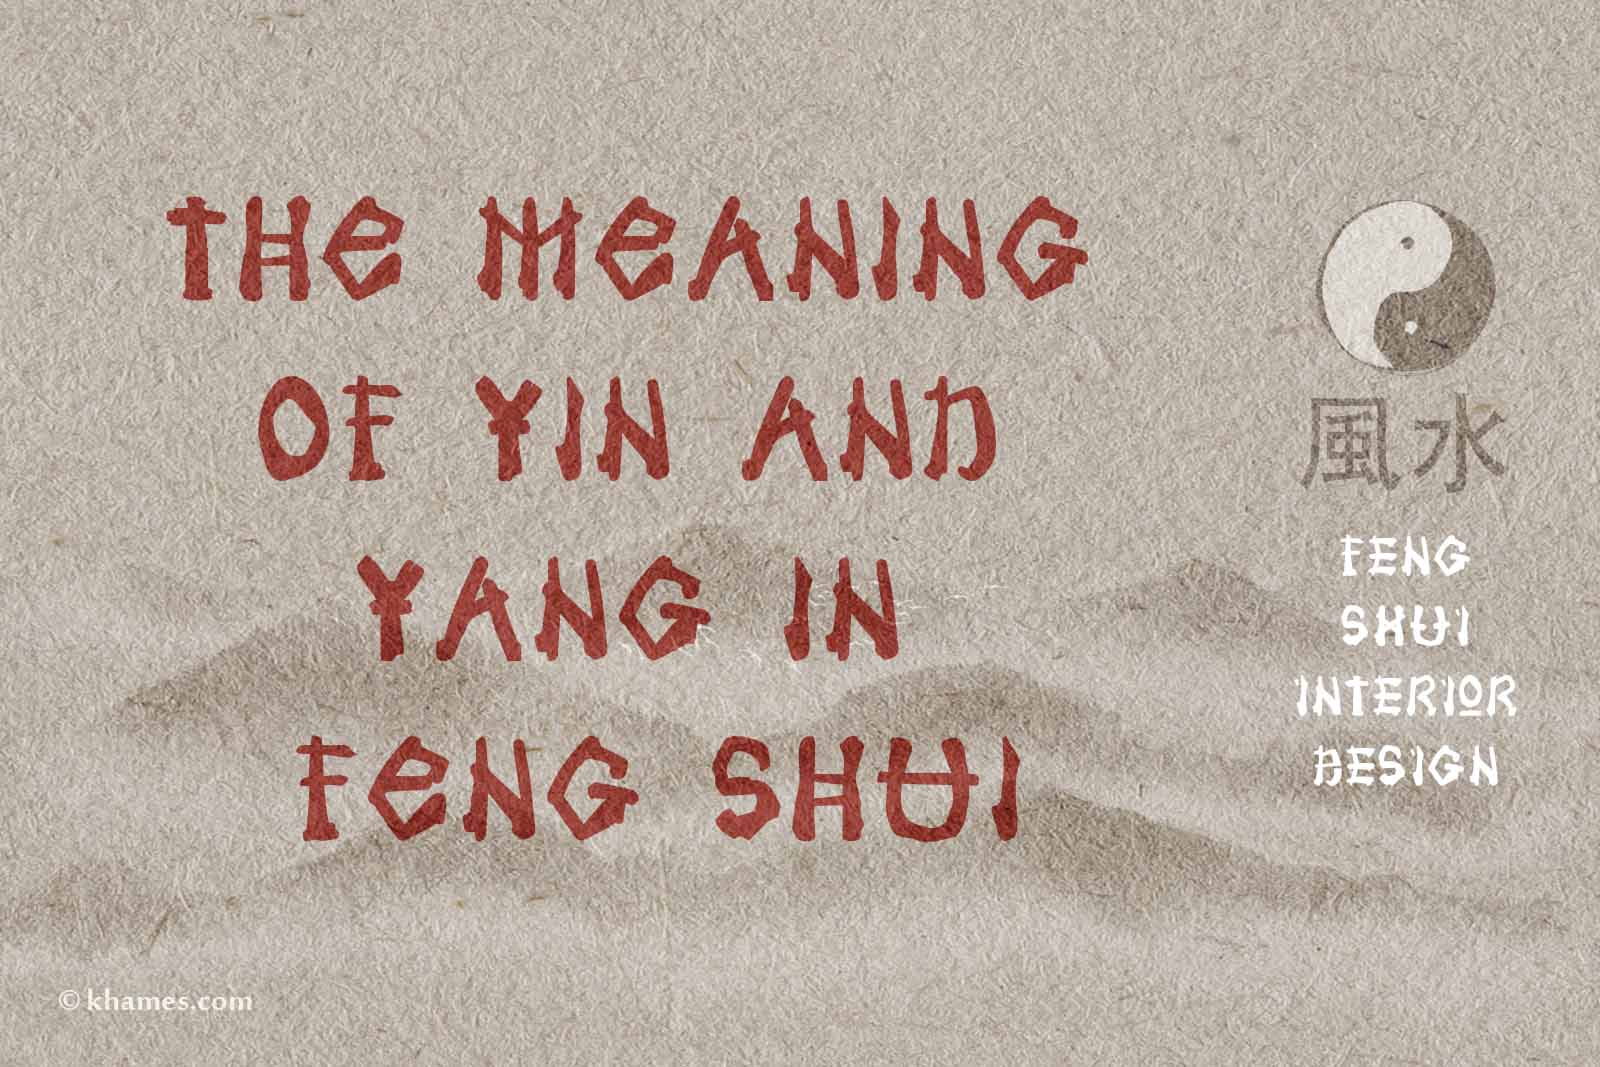 The Meaning of Yin and Yang